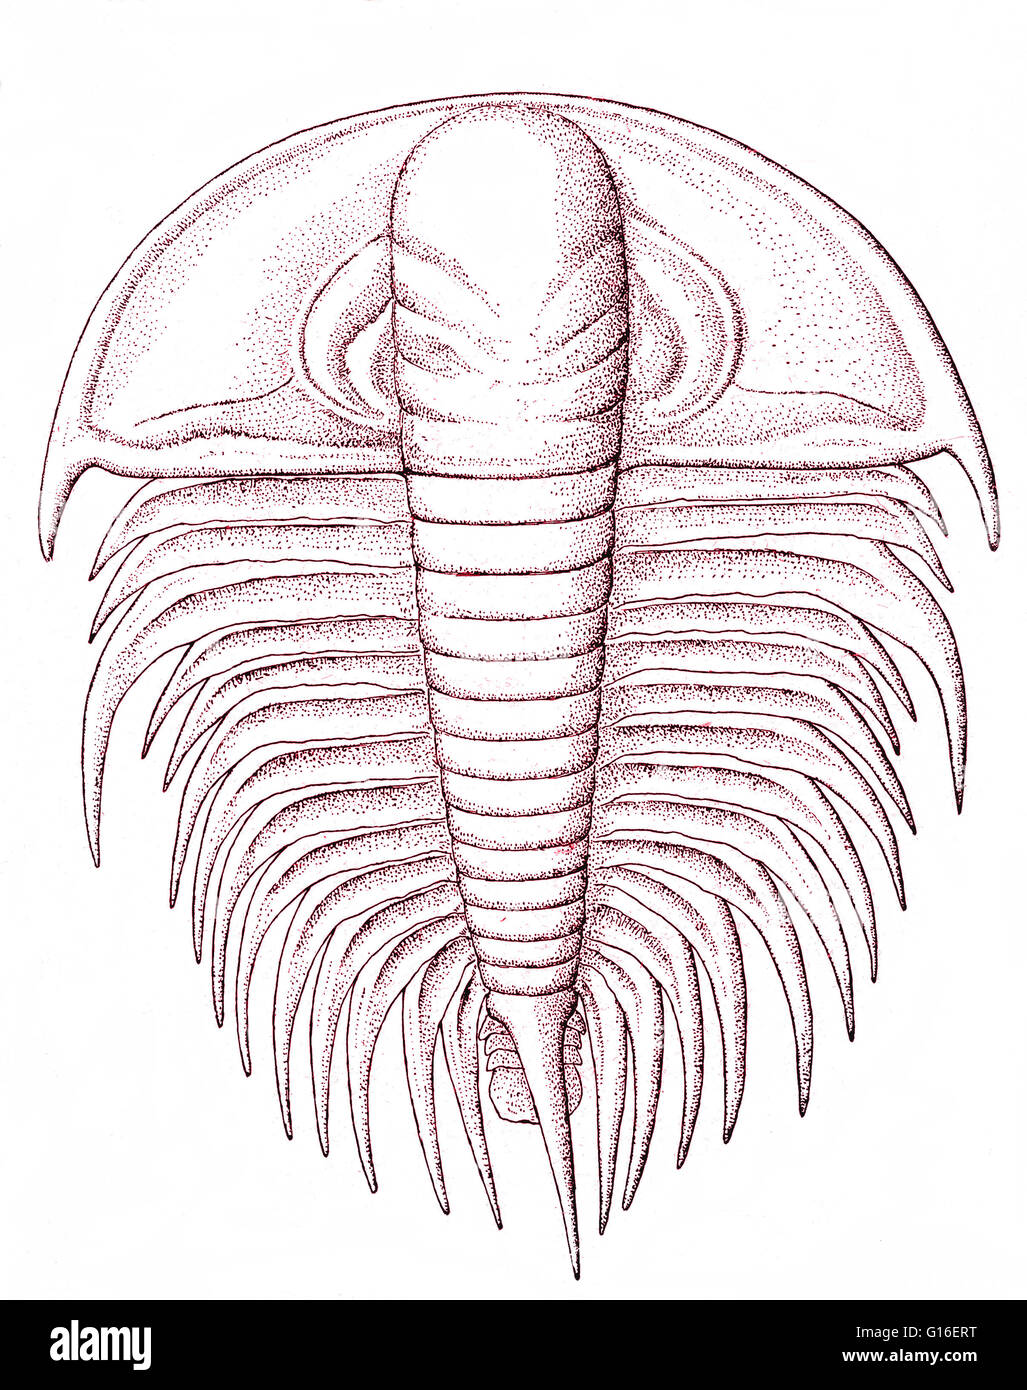 Color enhanced fossil record of an extinct arthropod from early Cambrian times. The Cambrian is the first geological period of the Paleozoic Era (1.9 million years ago). The rapid diversification of lifeforms in the Cambrian, known as the Cambrian explosi Stock Photo